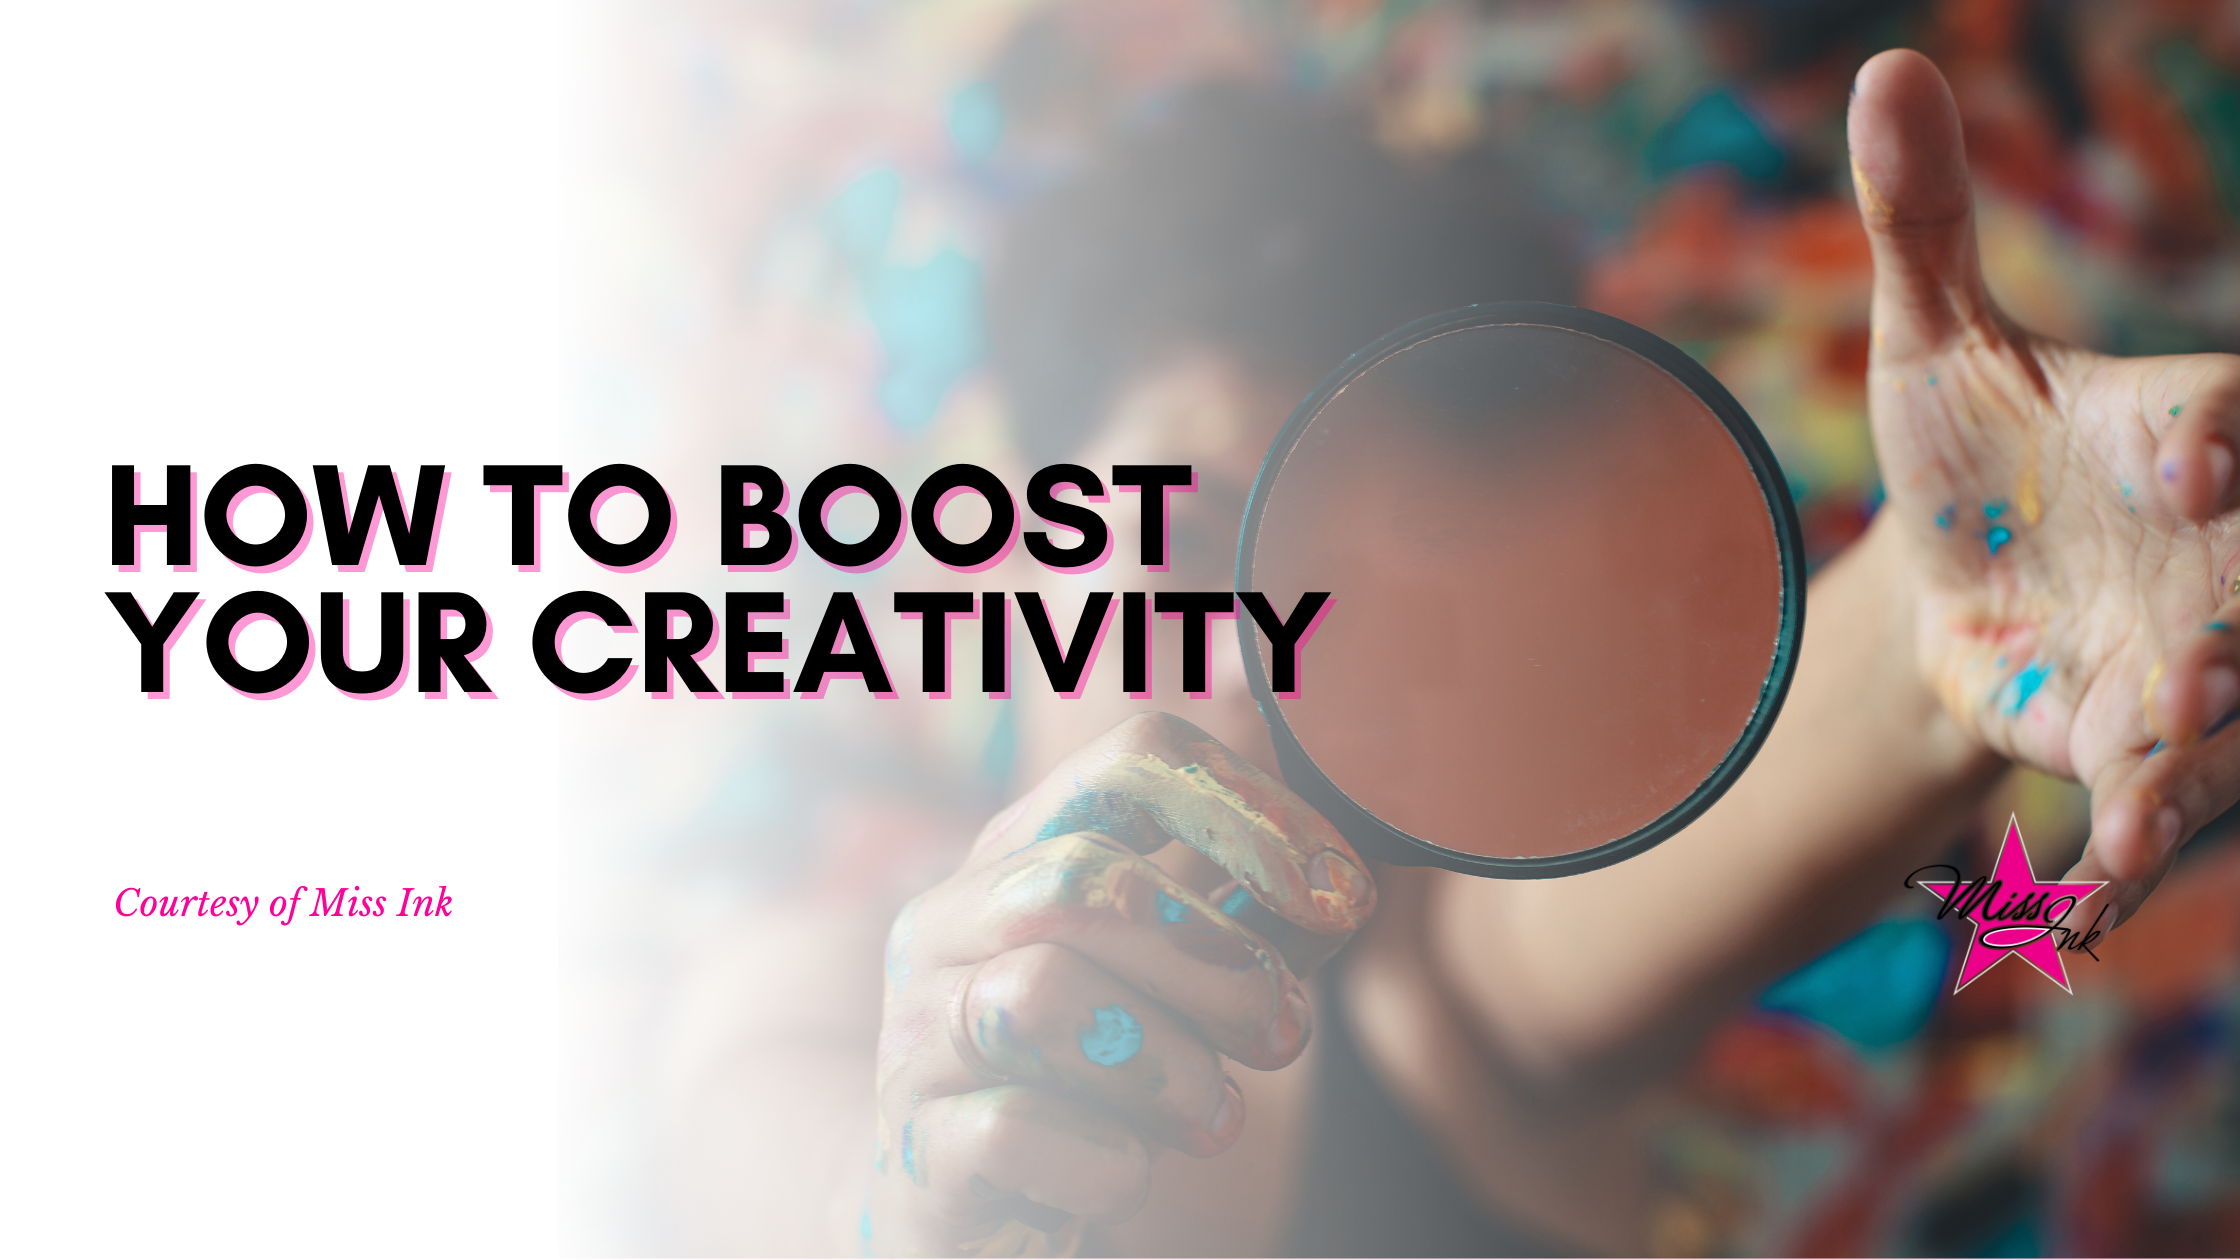 How To Boost Your Creativity